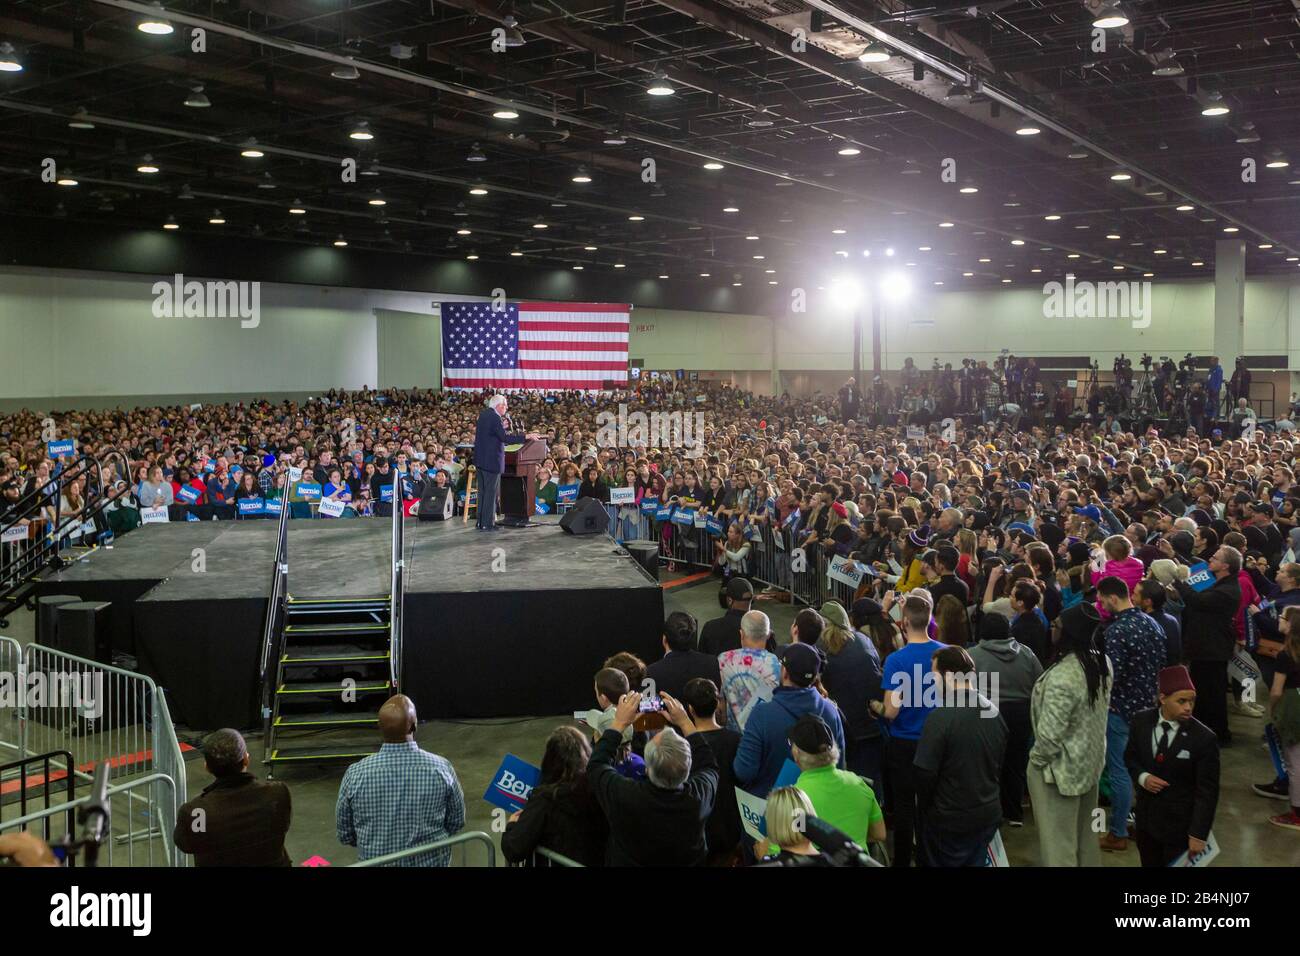 Detroit, Michigan, USA. 6th Mar, 2020. A Bernie Sanders presidential campaign rally in downtown Detroit attracted thousands, just days before the March 10 Michigan Democratic primary election. Credit: Jim West/Alamy Live News Stock Photo